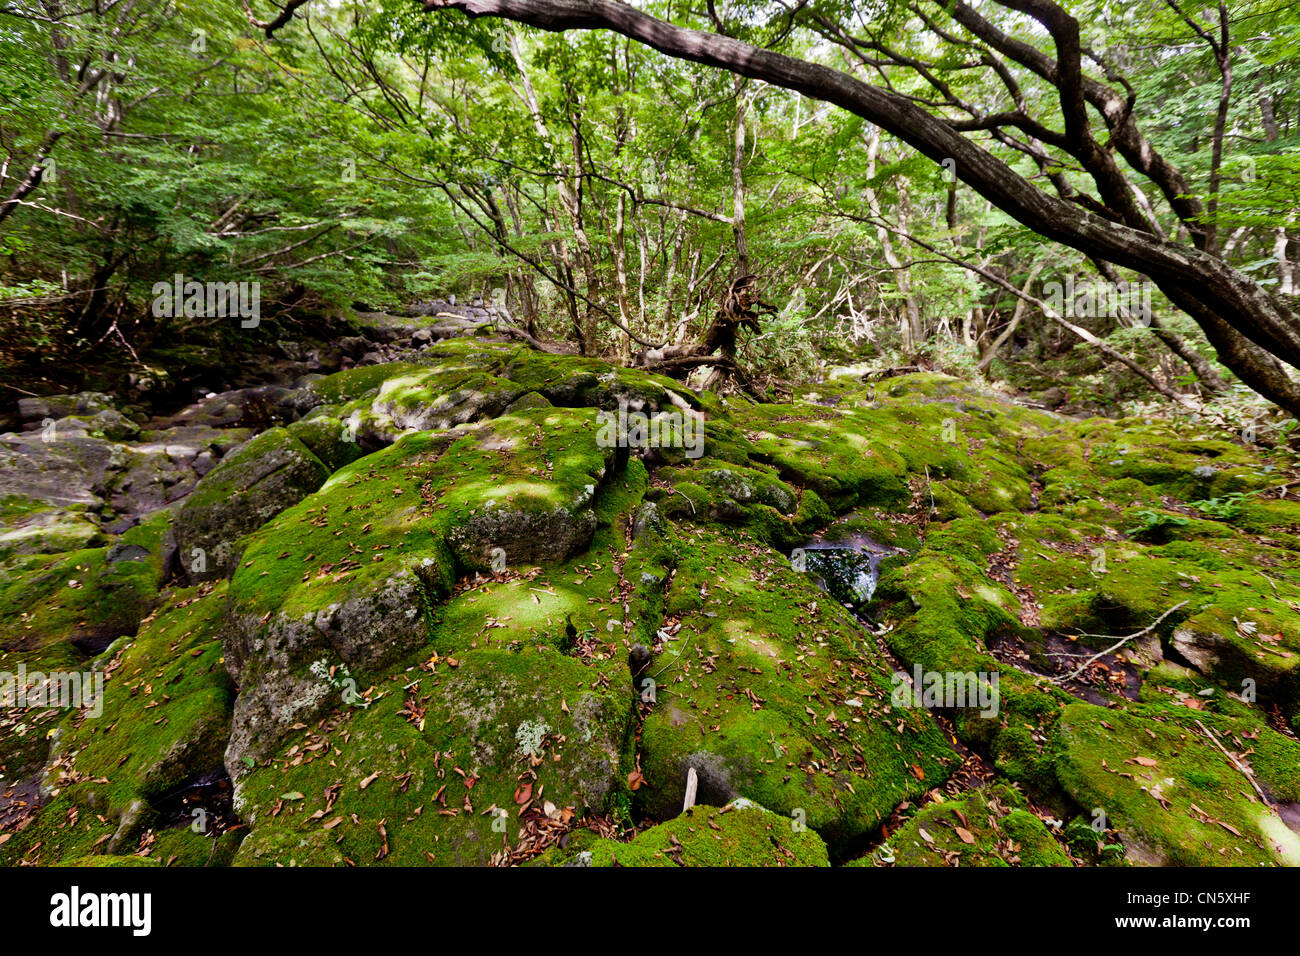 South Korea, Jeju Province, Mount Halla National Park, forest undergrowth on the way to the top of Mount Halla (or Hallasan), Stock Photo